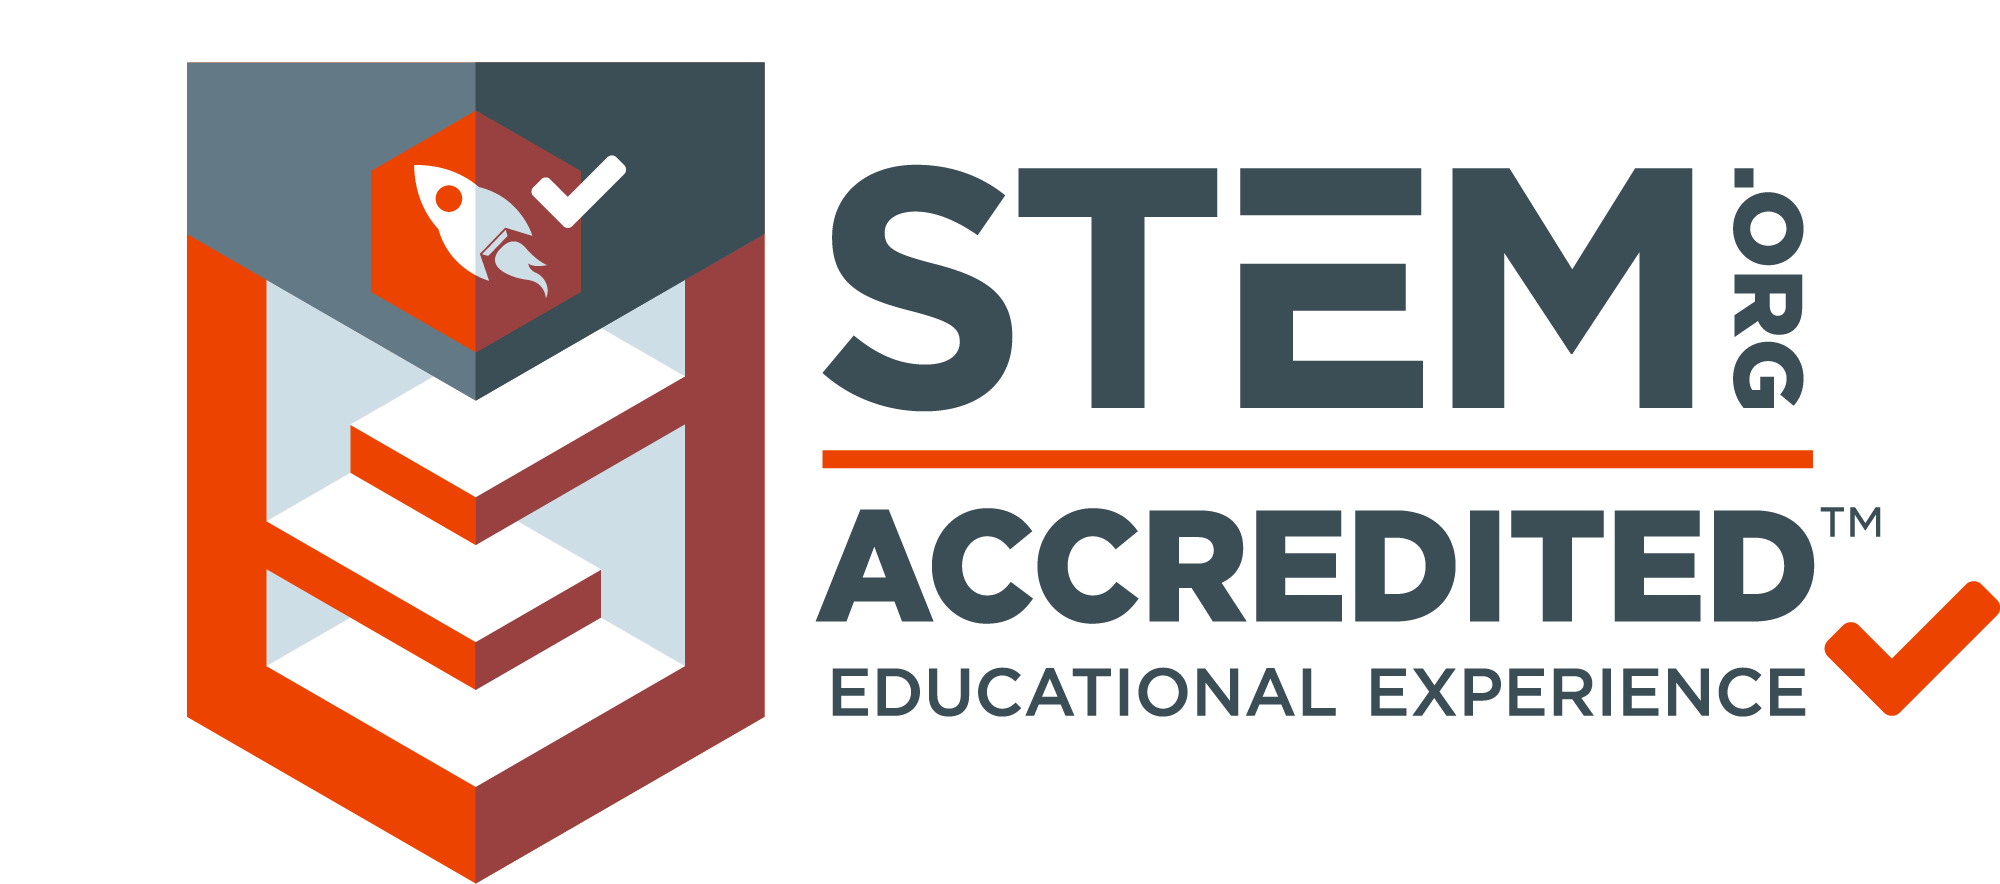 STEM.org-Accredited-Educational-Experience